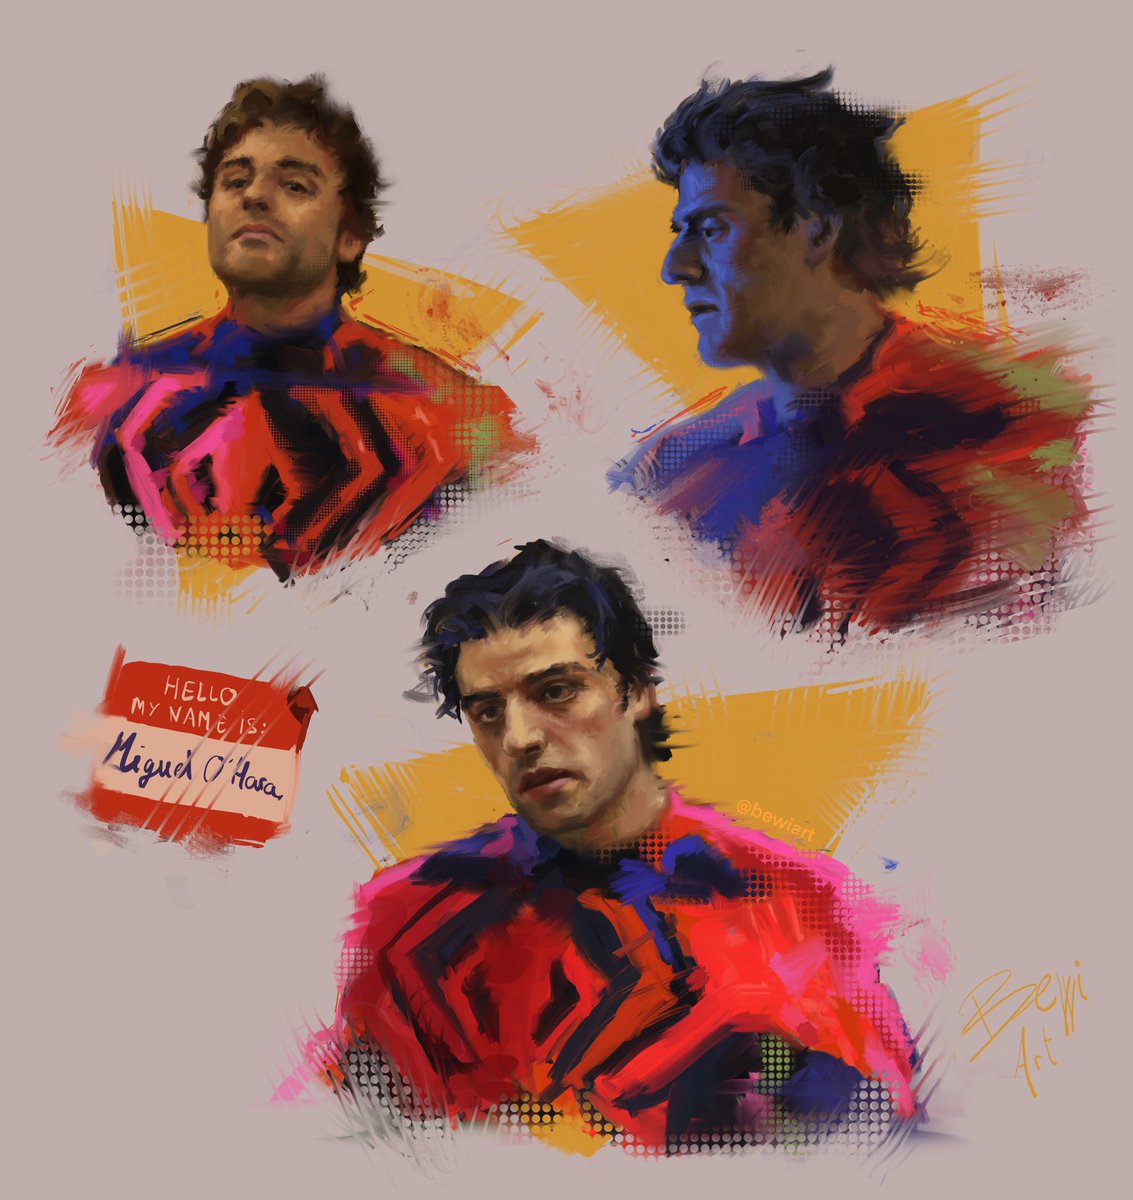 I loved #MiguelOHara in the movie so here are some drawings of Oscar Isaac as him
#SpiderMan2099 #SpiderManAcrossTheSpiderVerse #spidergwen #MilesMorales #AcrossTheSpiderVerse